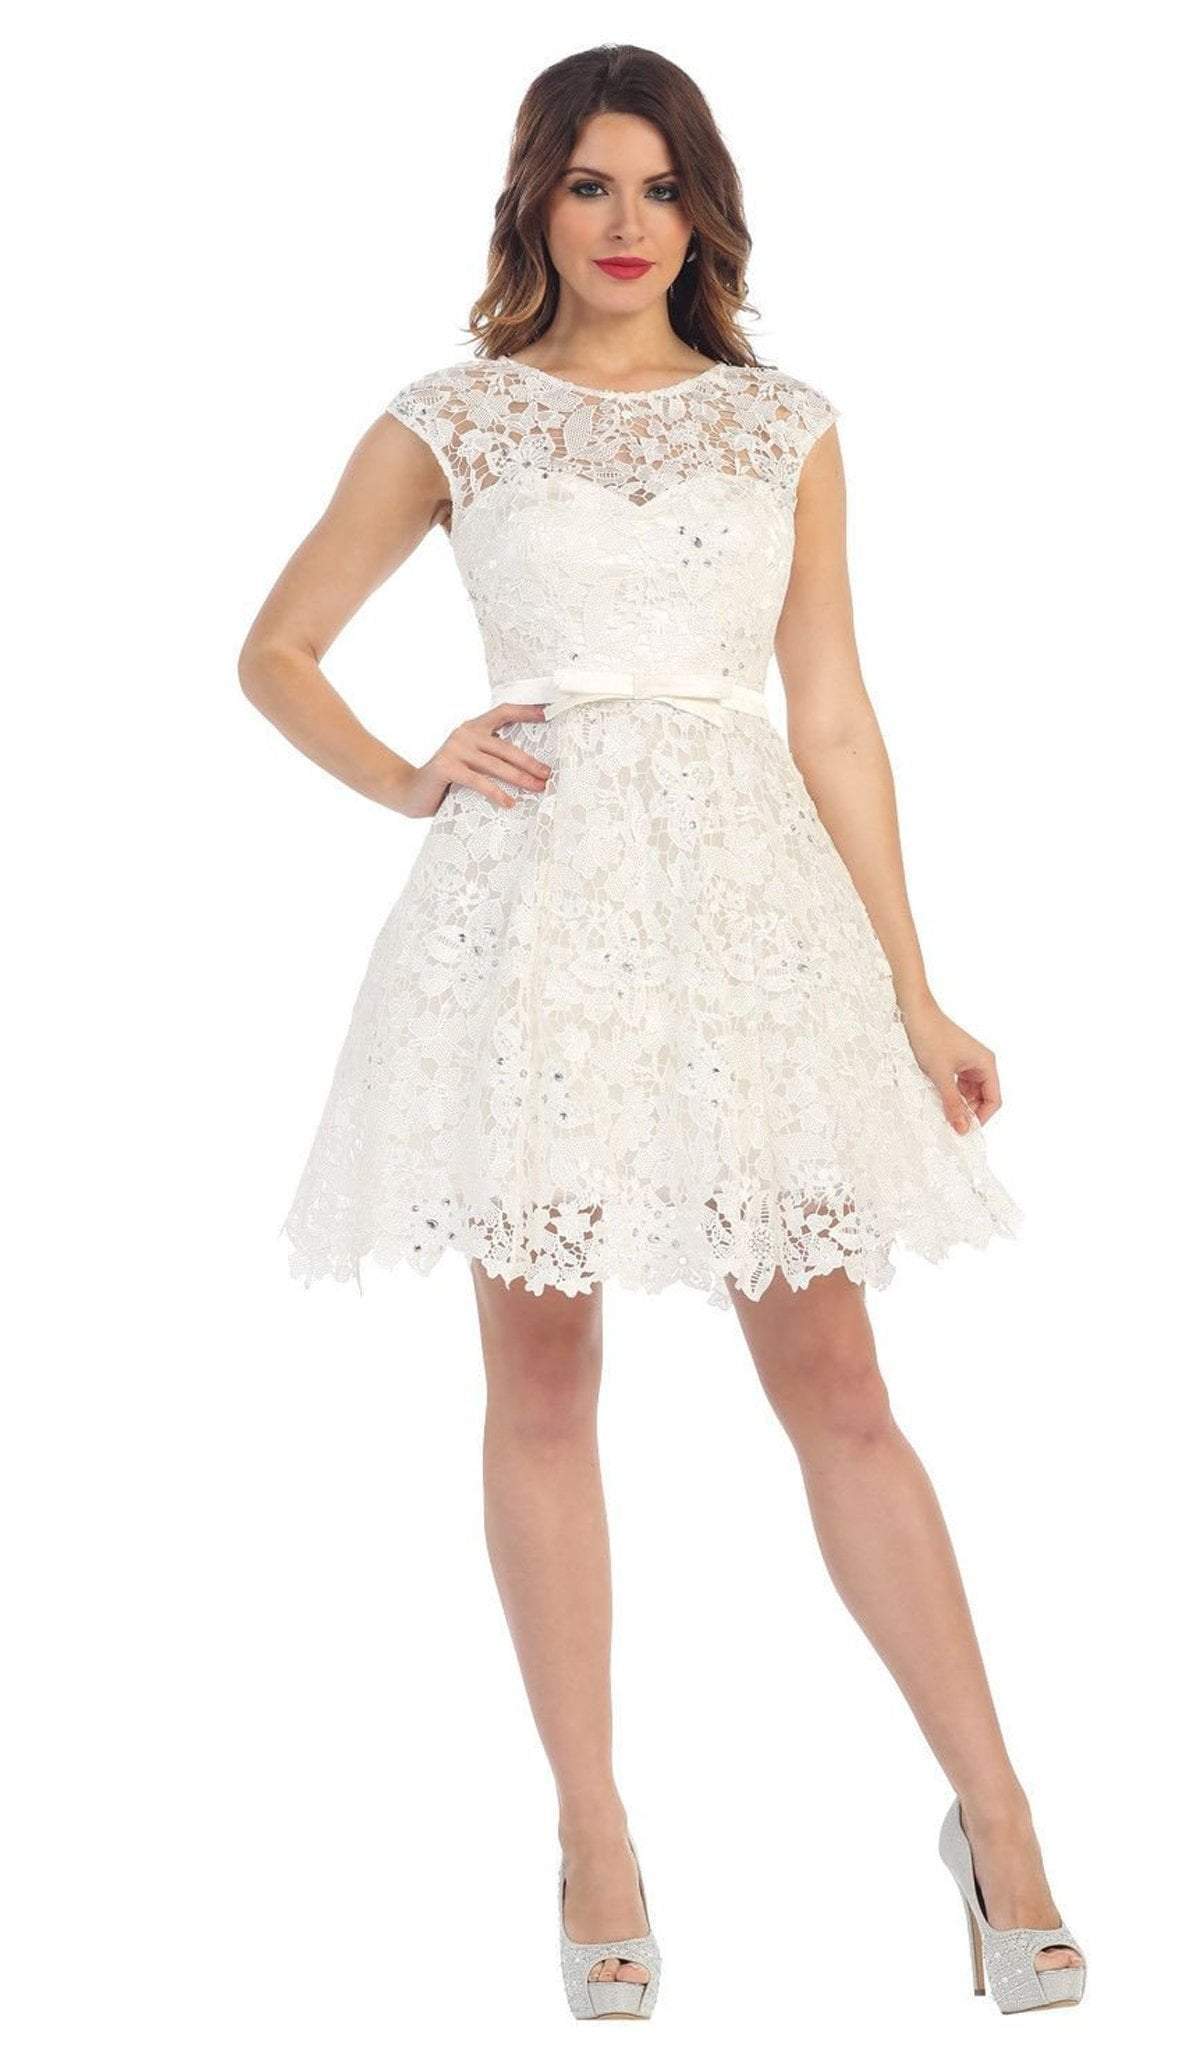 May Queen - Beaded Floral Cocktail Dress Special Occasion Dress 4 / Ivory